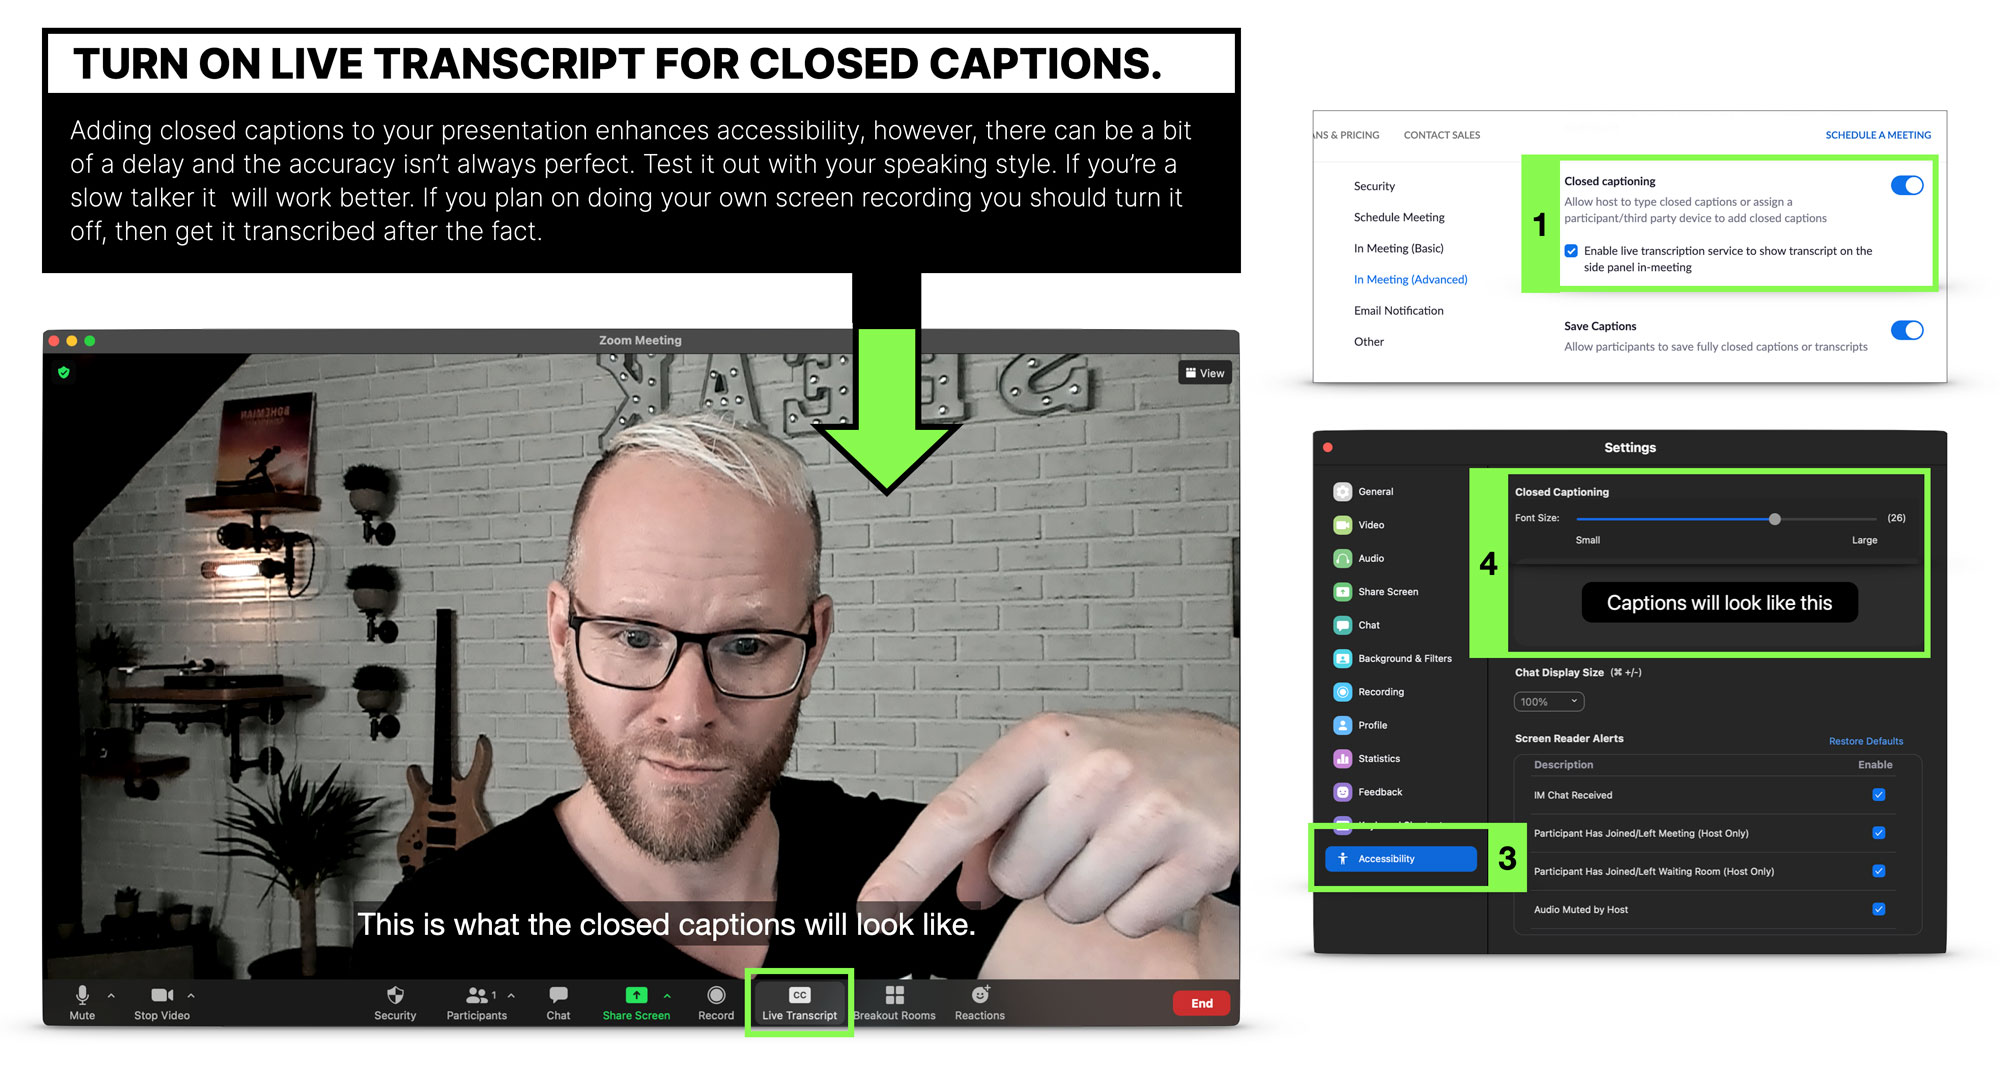 How to use live closed caption transcriptions in Zoom